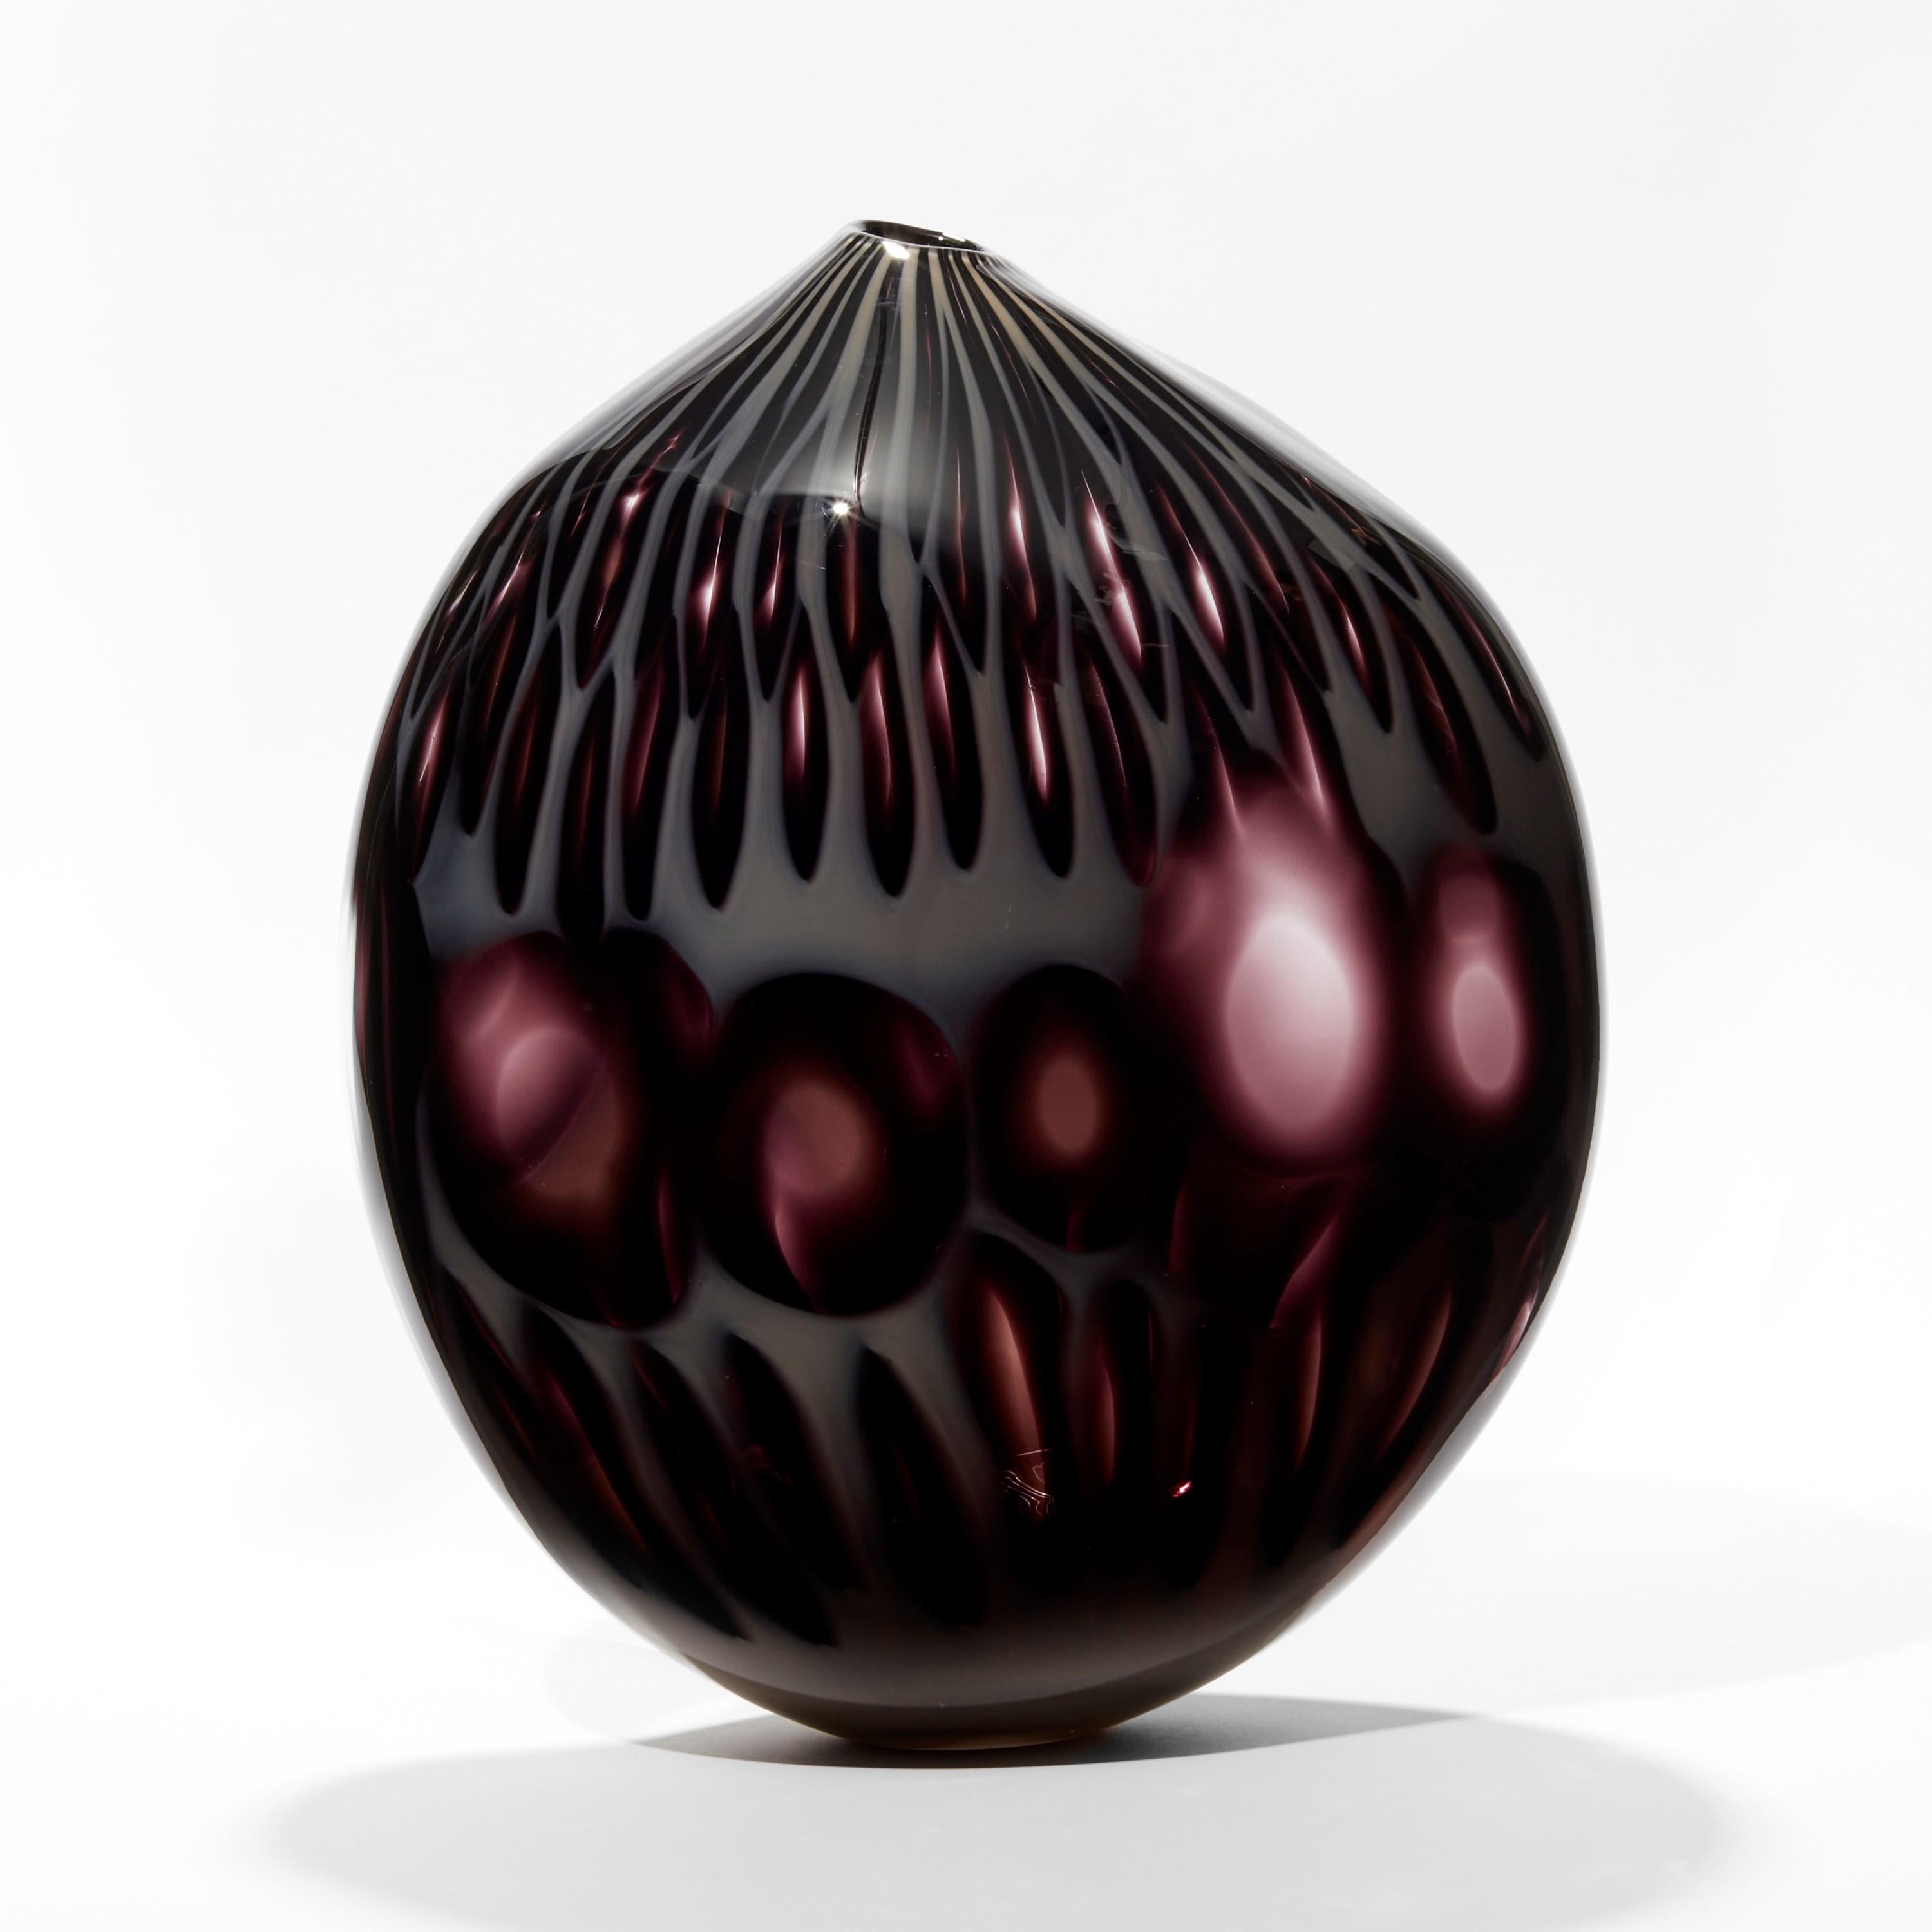 'Papavero Nero' is a unique glass artwork by the Canadian artist, Michèle Oberdieck.
Michèle Oberdieck explores balance and asymmetry through colour, form and surface decoration. Presenting her sculptural works as a gesture, an expressive mark,